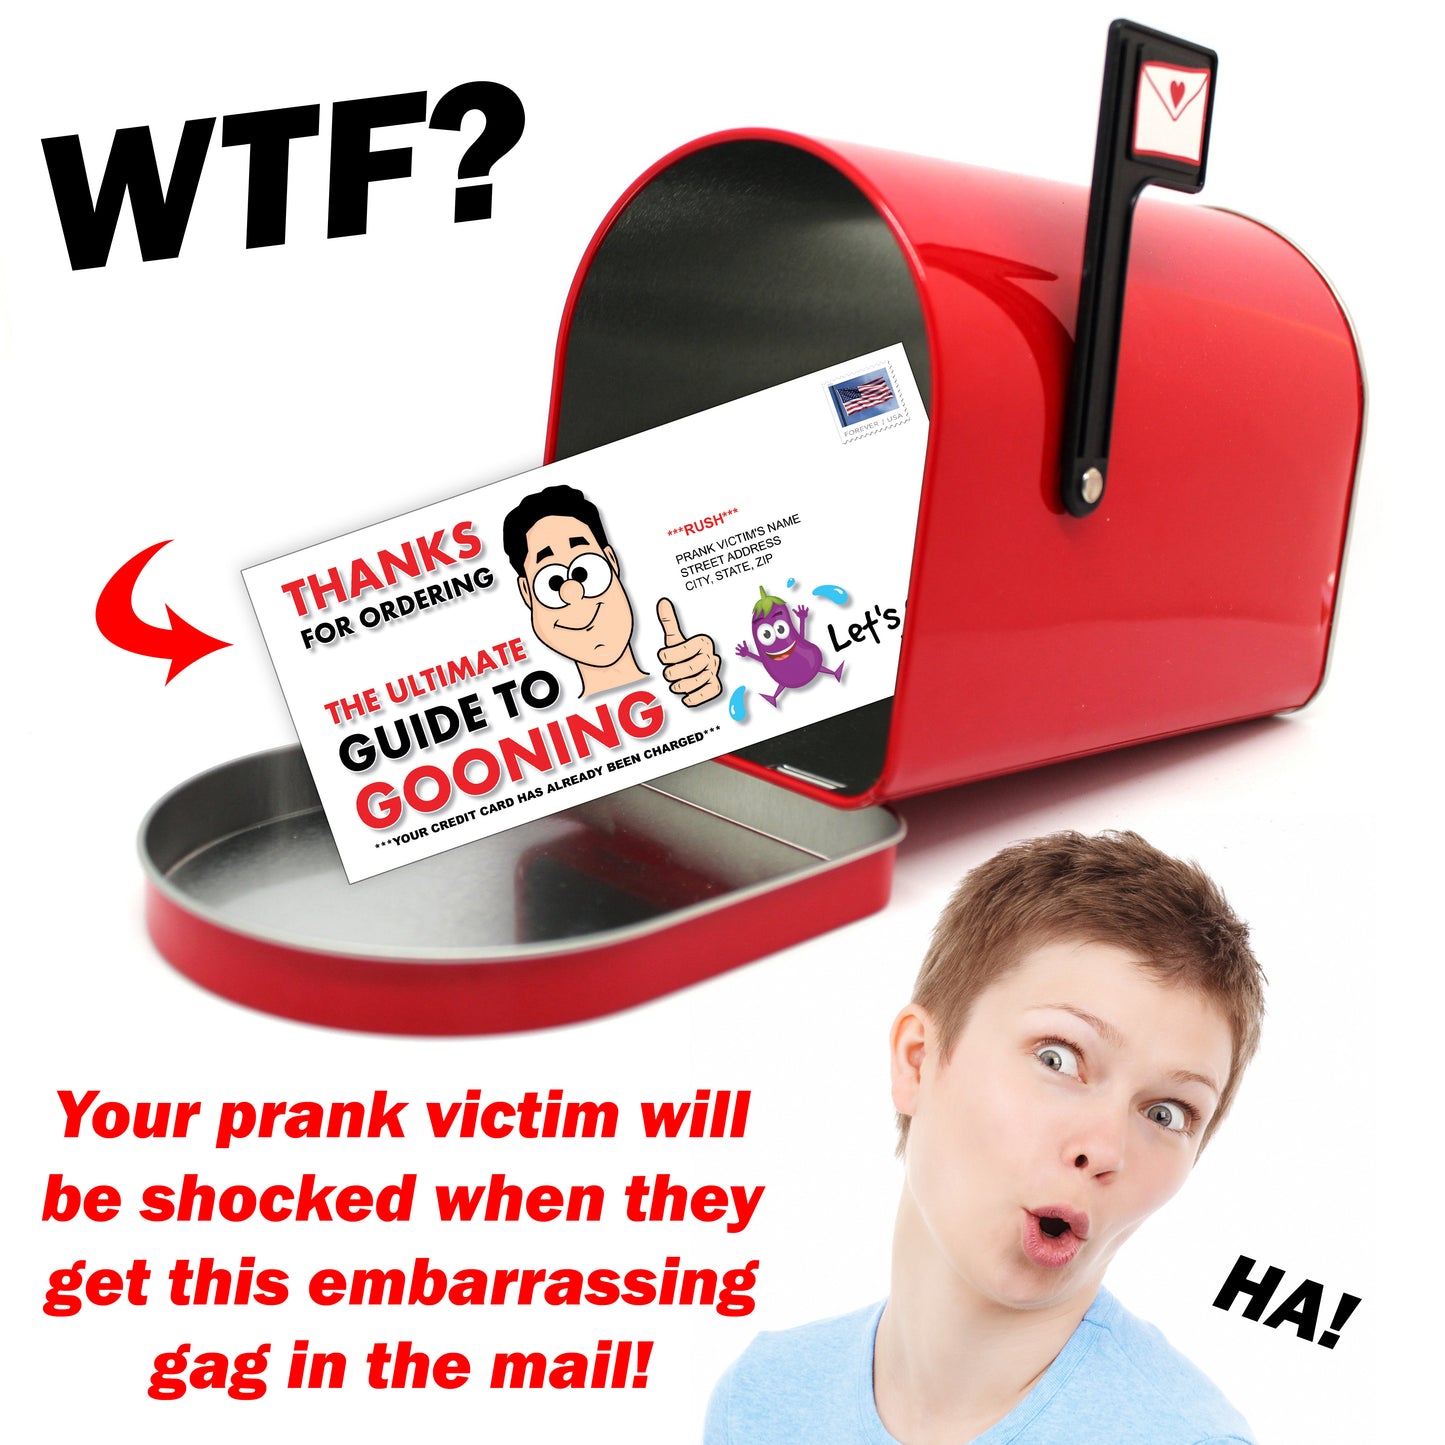 The Ultimate Guide to Gooning Prank Letter